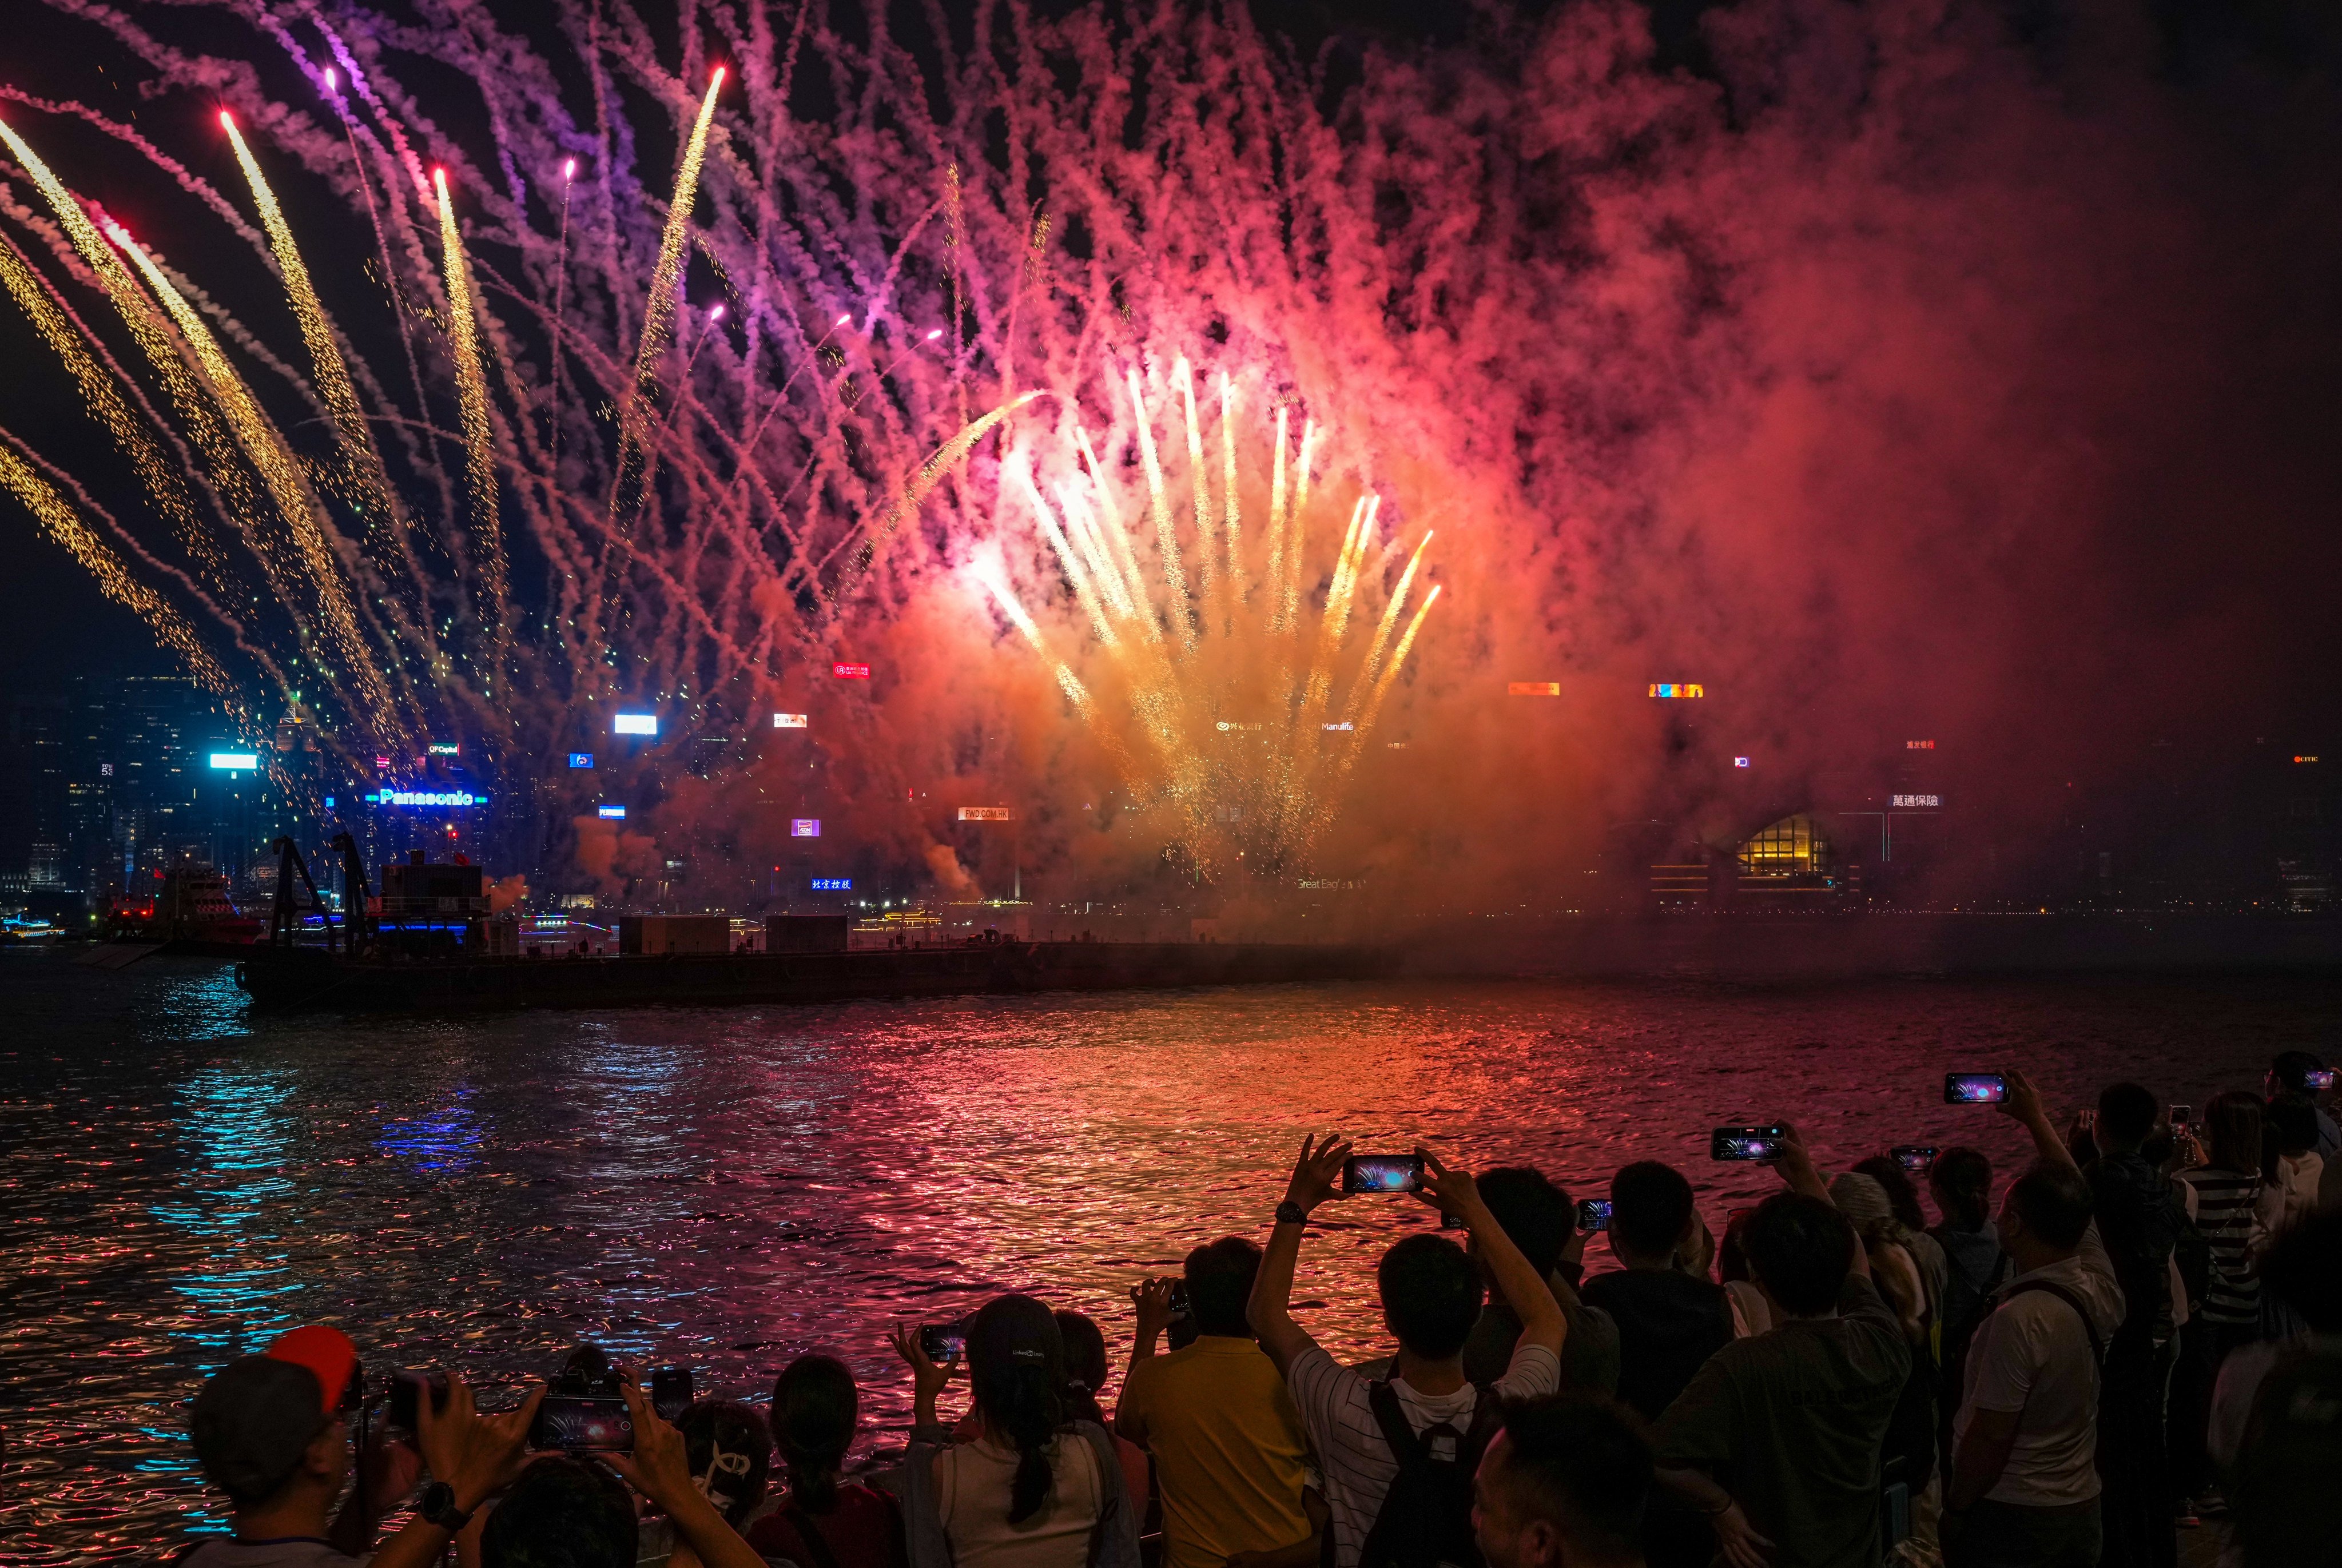 Crowds gather at Tsim Sha Tsui waterfront to watch the Labour Day fireworks show in Victoria Harbour, on May 1. Many people complained about not being able to see the spectacle because of thick smoke. Photo: May Tse